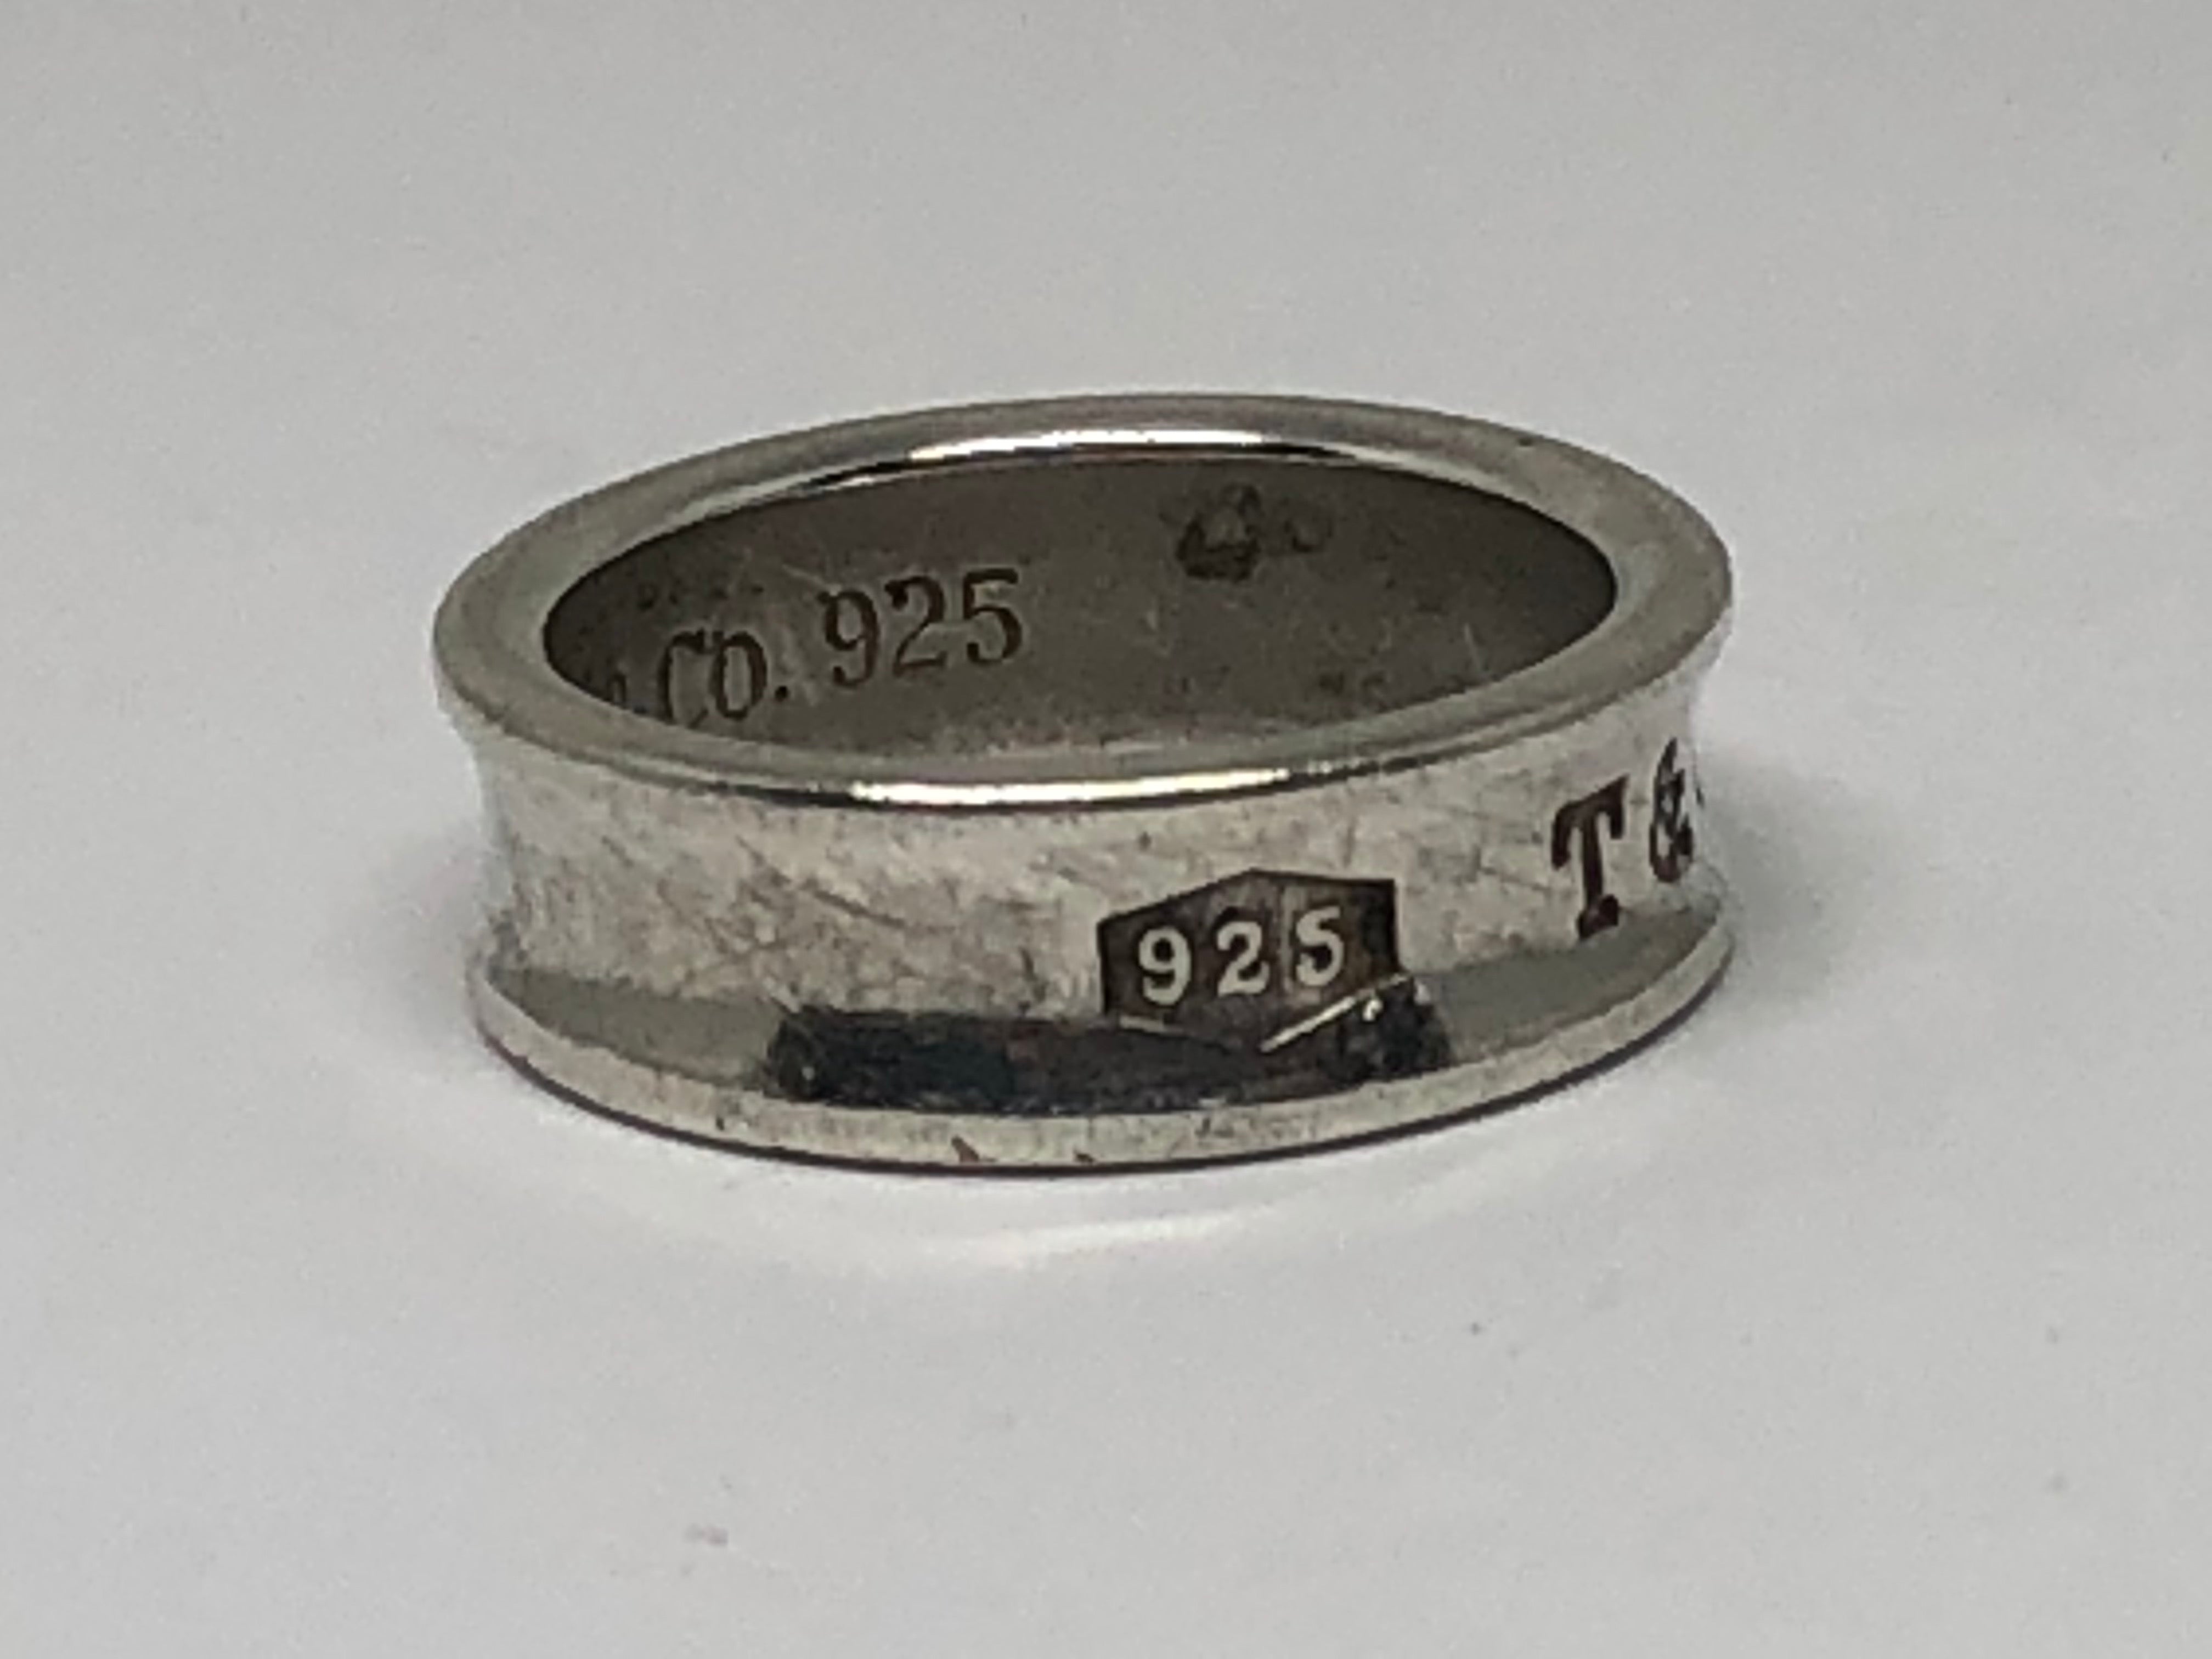 Tiffany & Co Sterling Silver Concave 1837 Band Ring Size 7.5